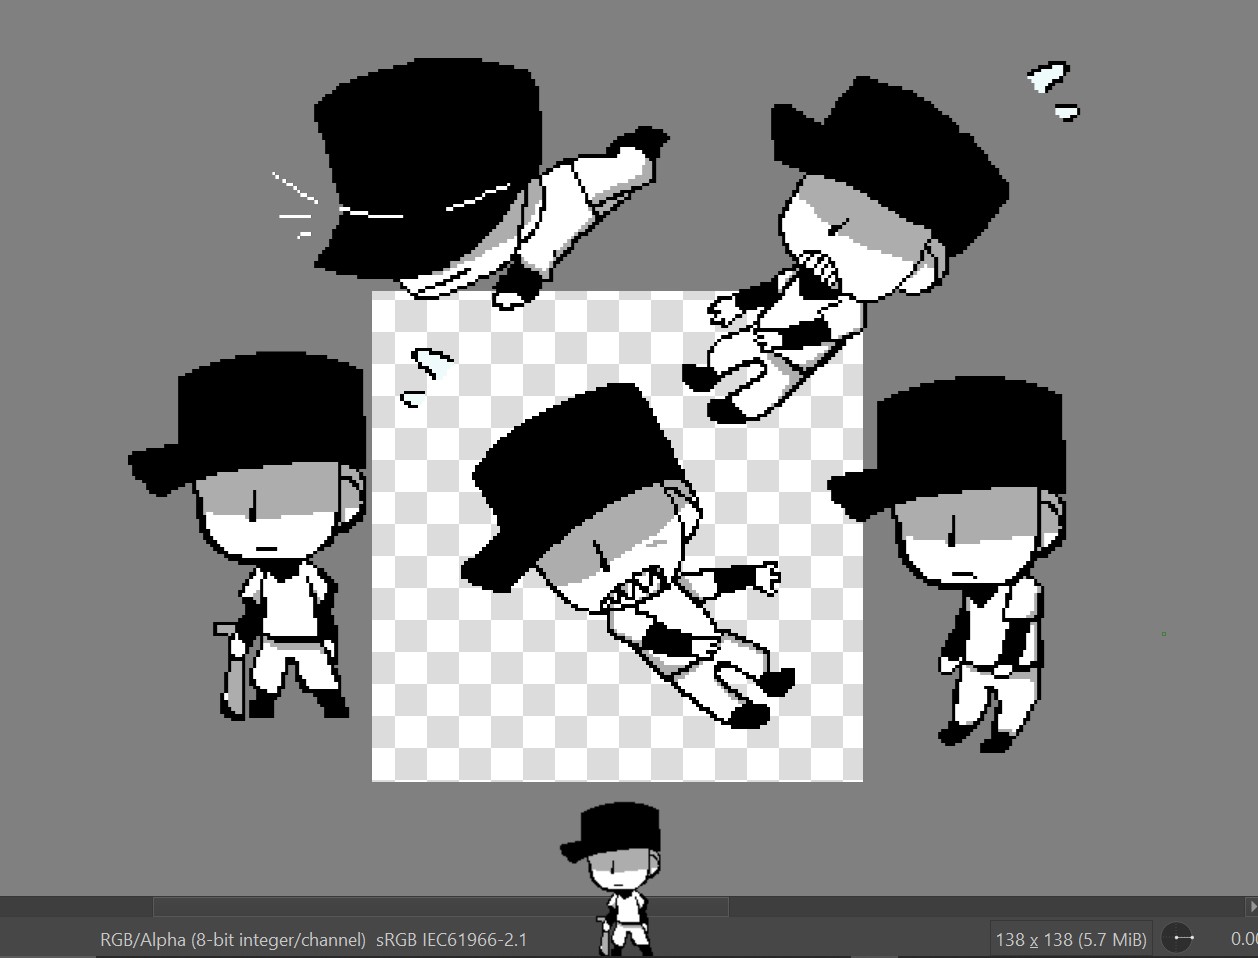 A screenshot of a Krita digital drawing canvas with multiple pixelated style Shimeji of the Batter from a videogame called OFF.